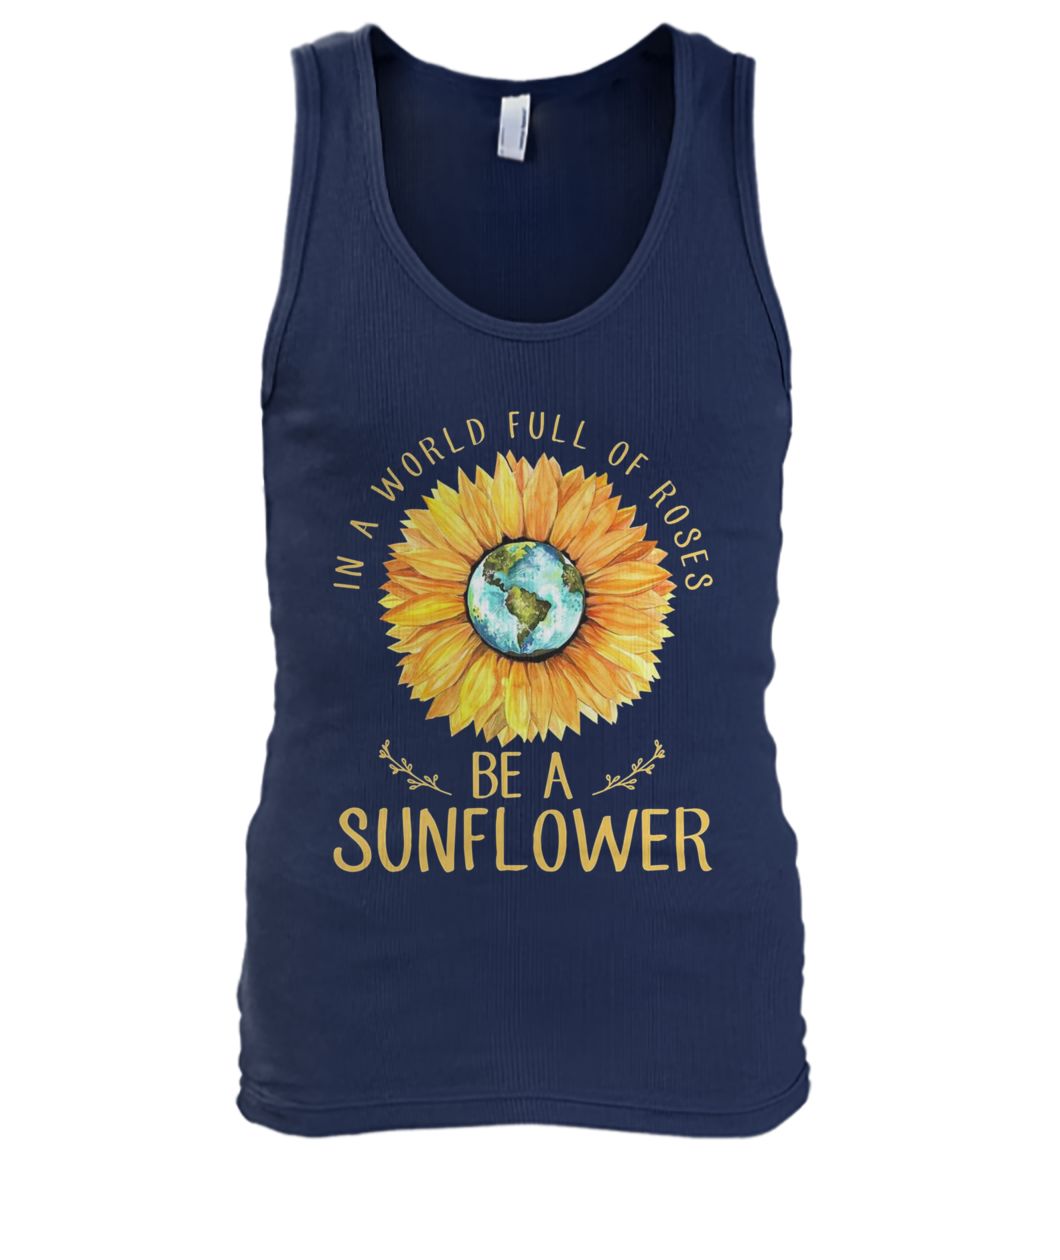 In a world full of roses be a sunflower earth men's tank top